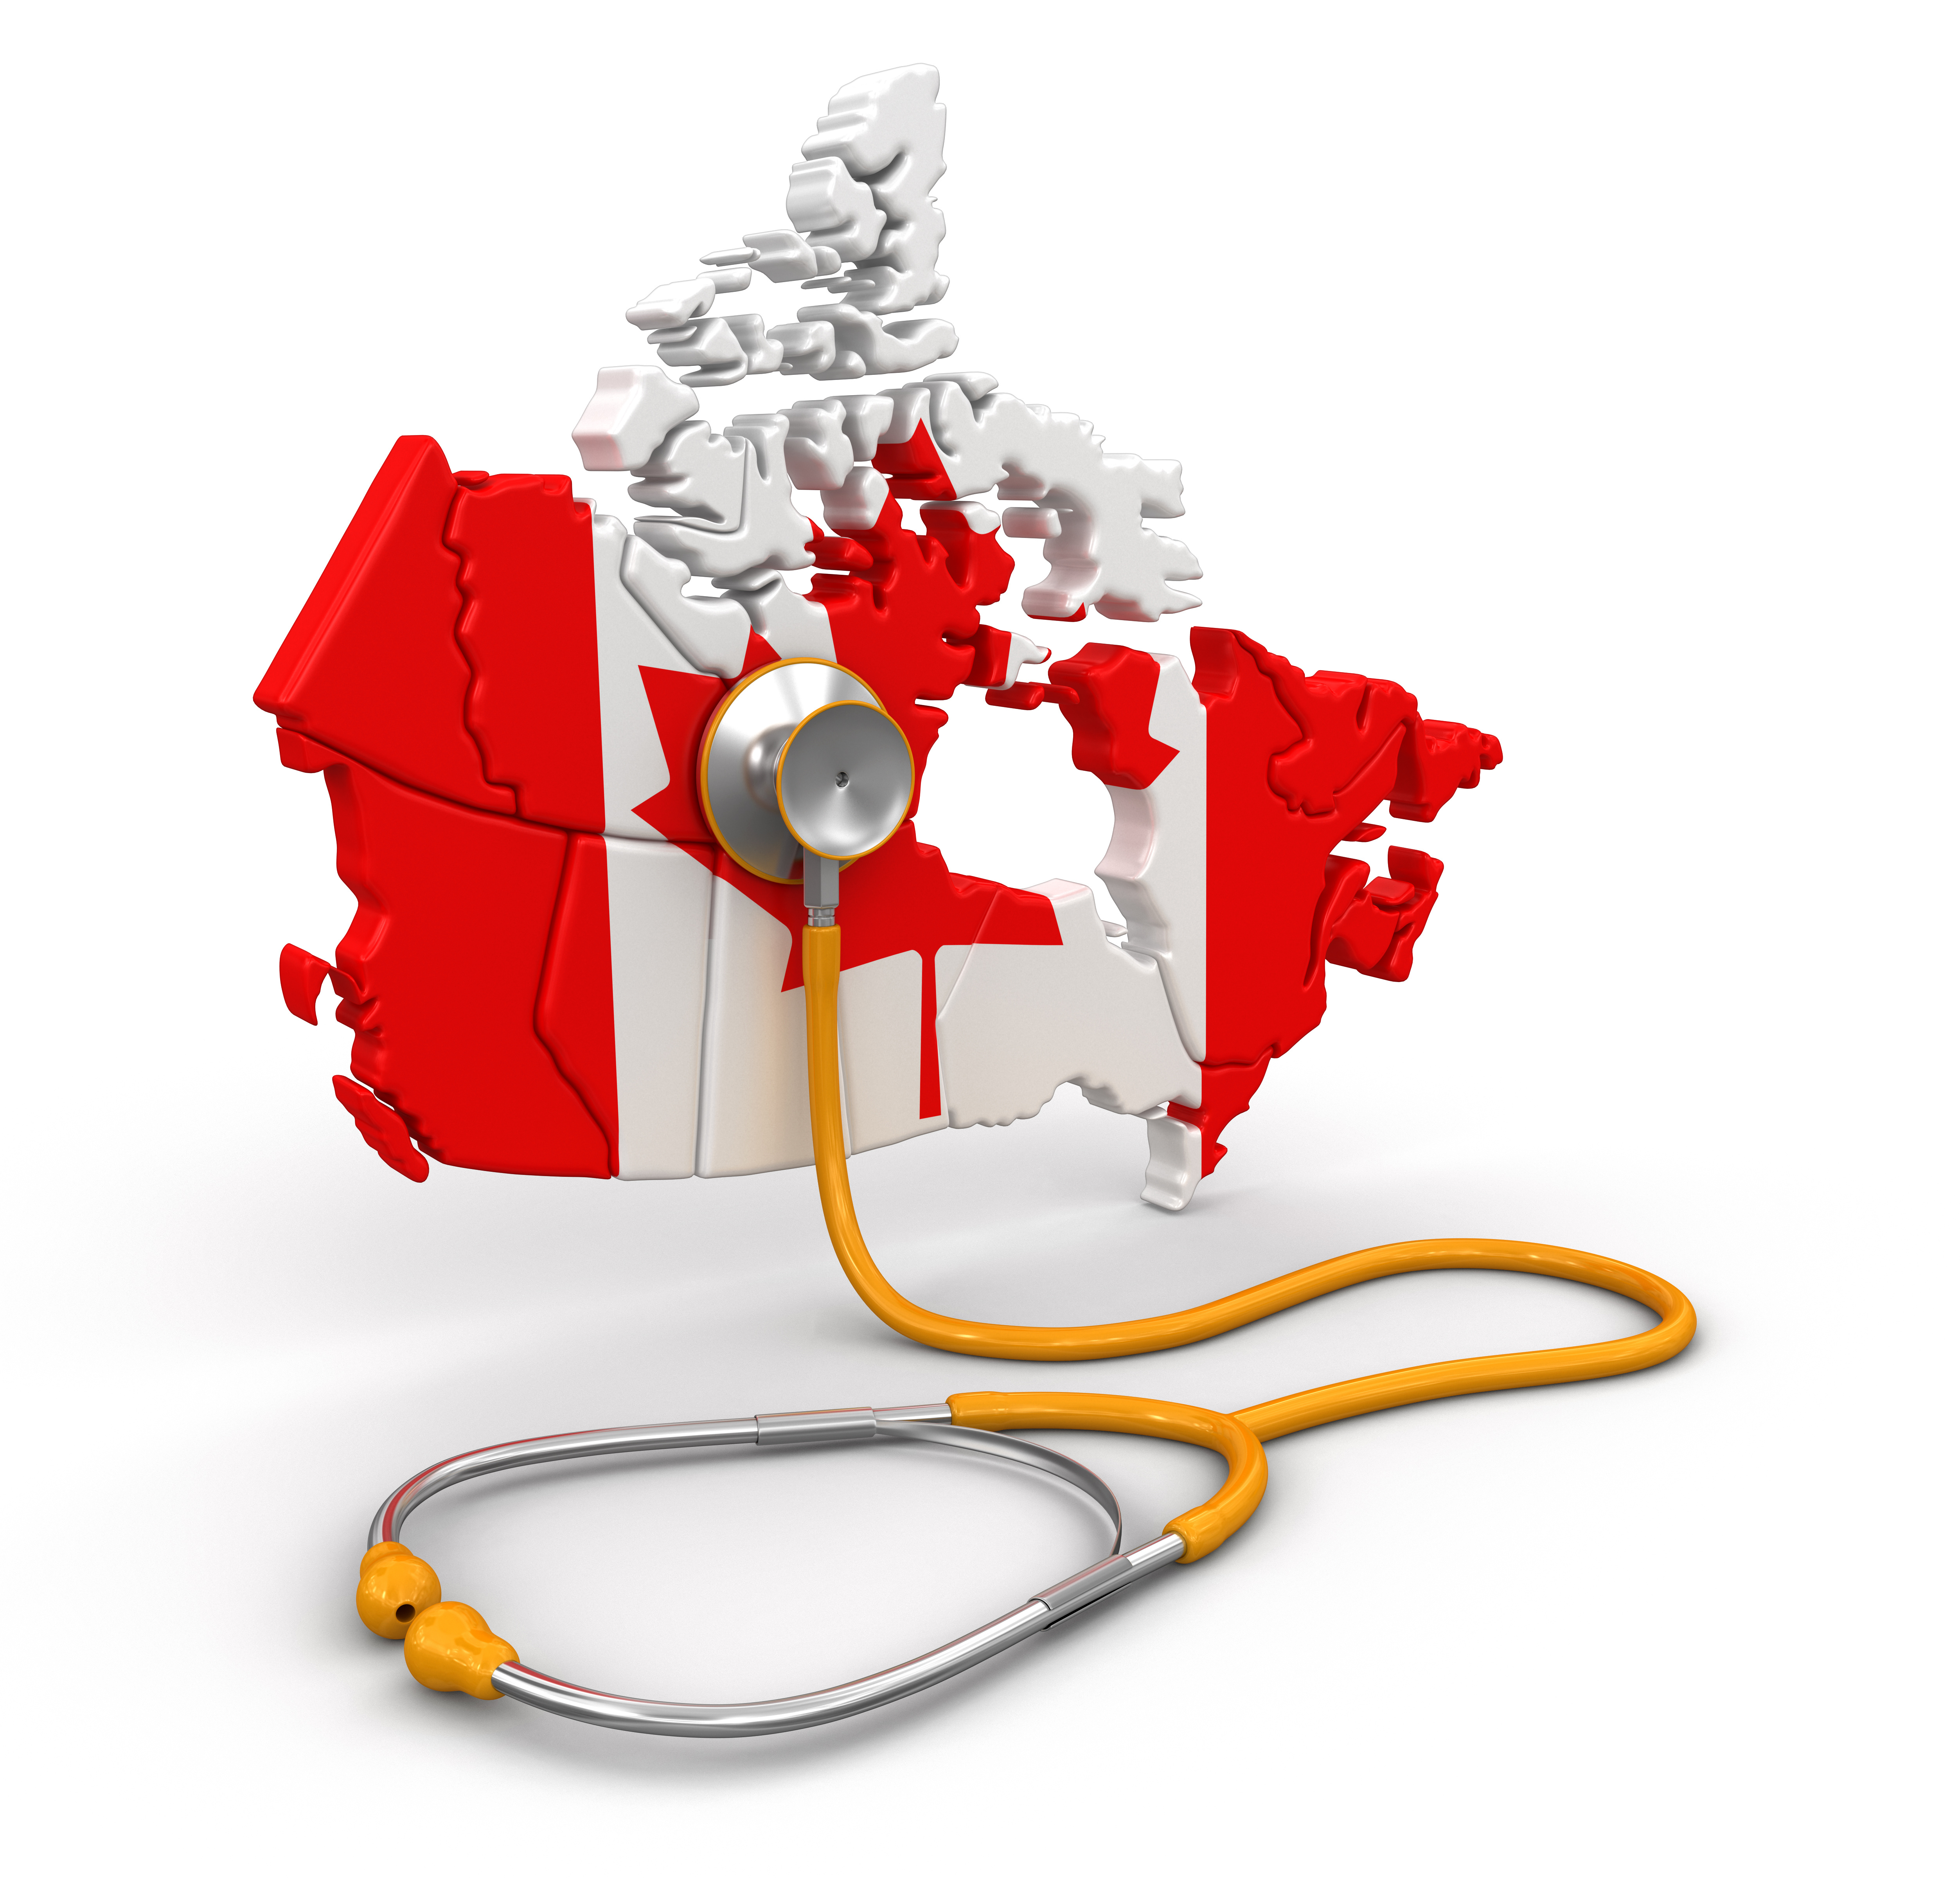 Canadas Declining Health Care System and the